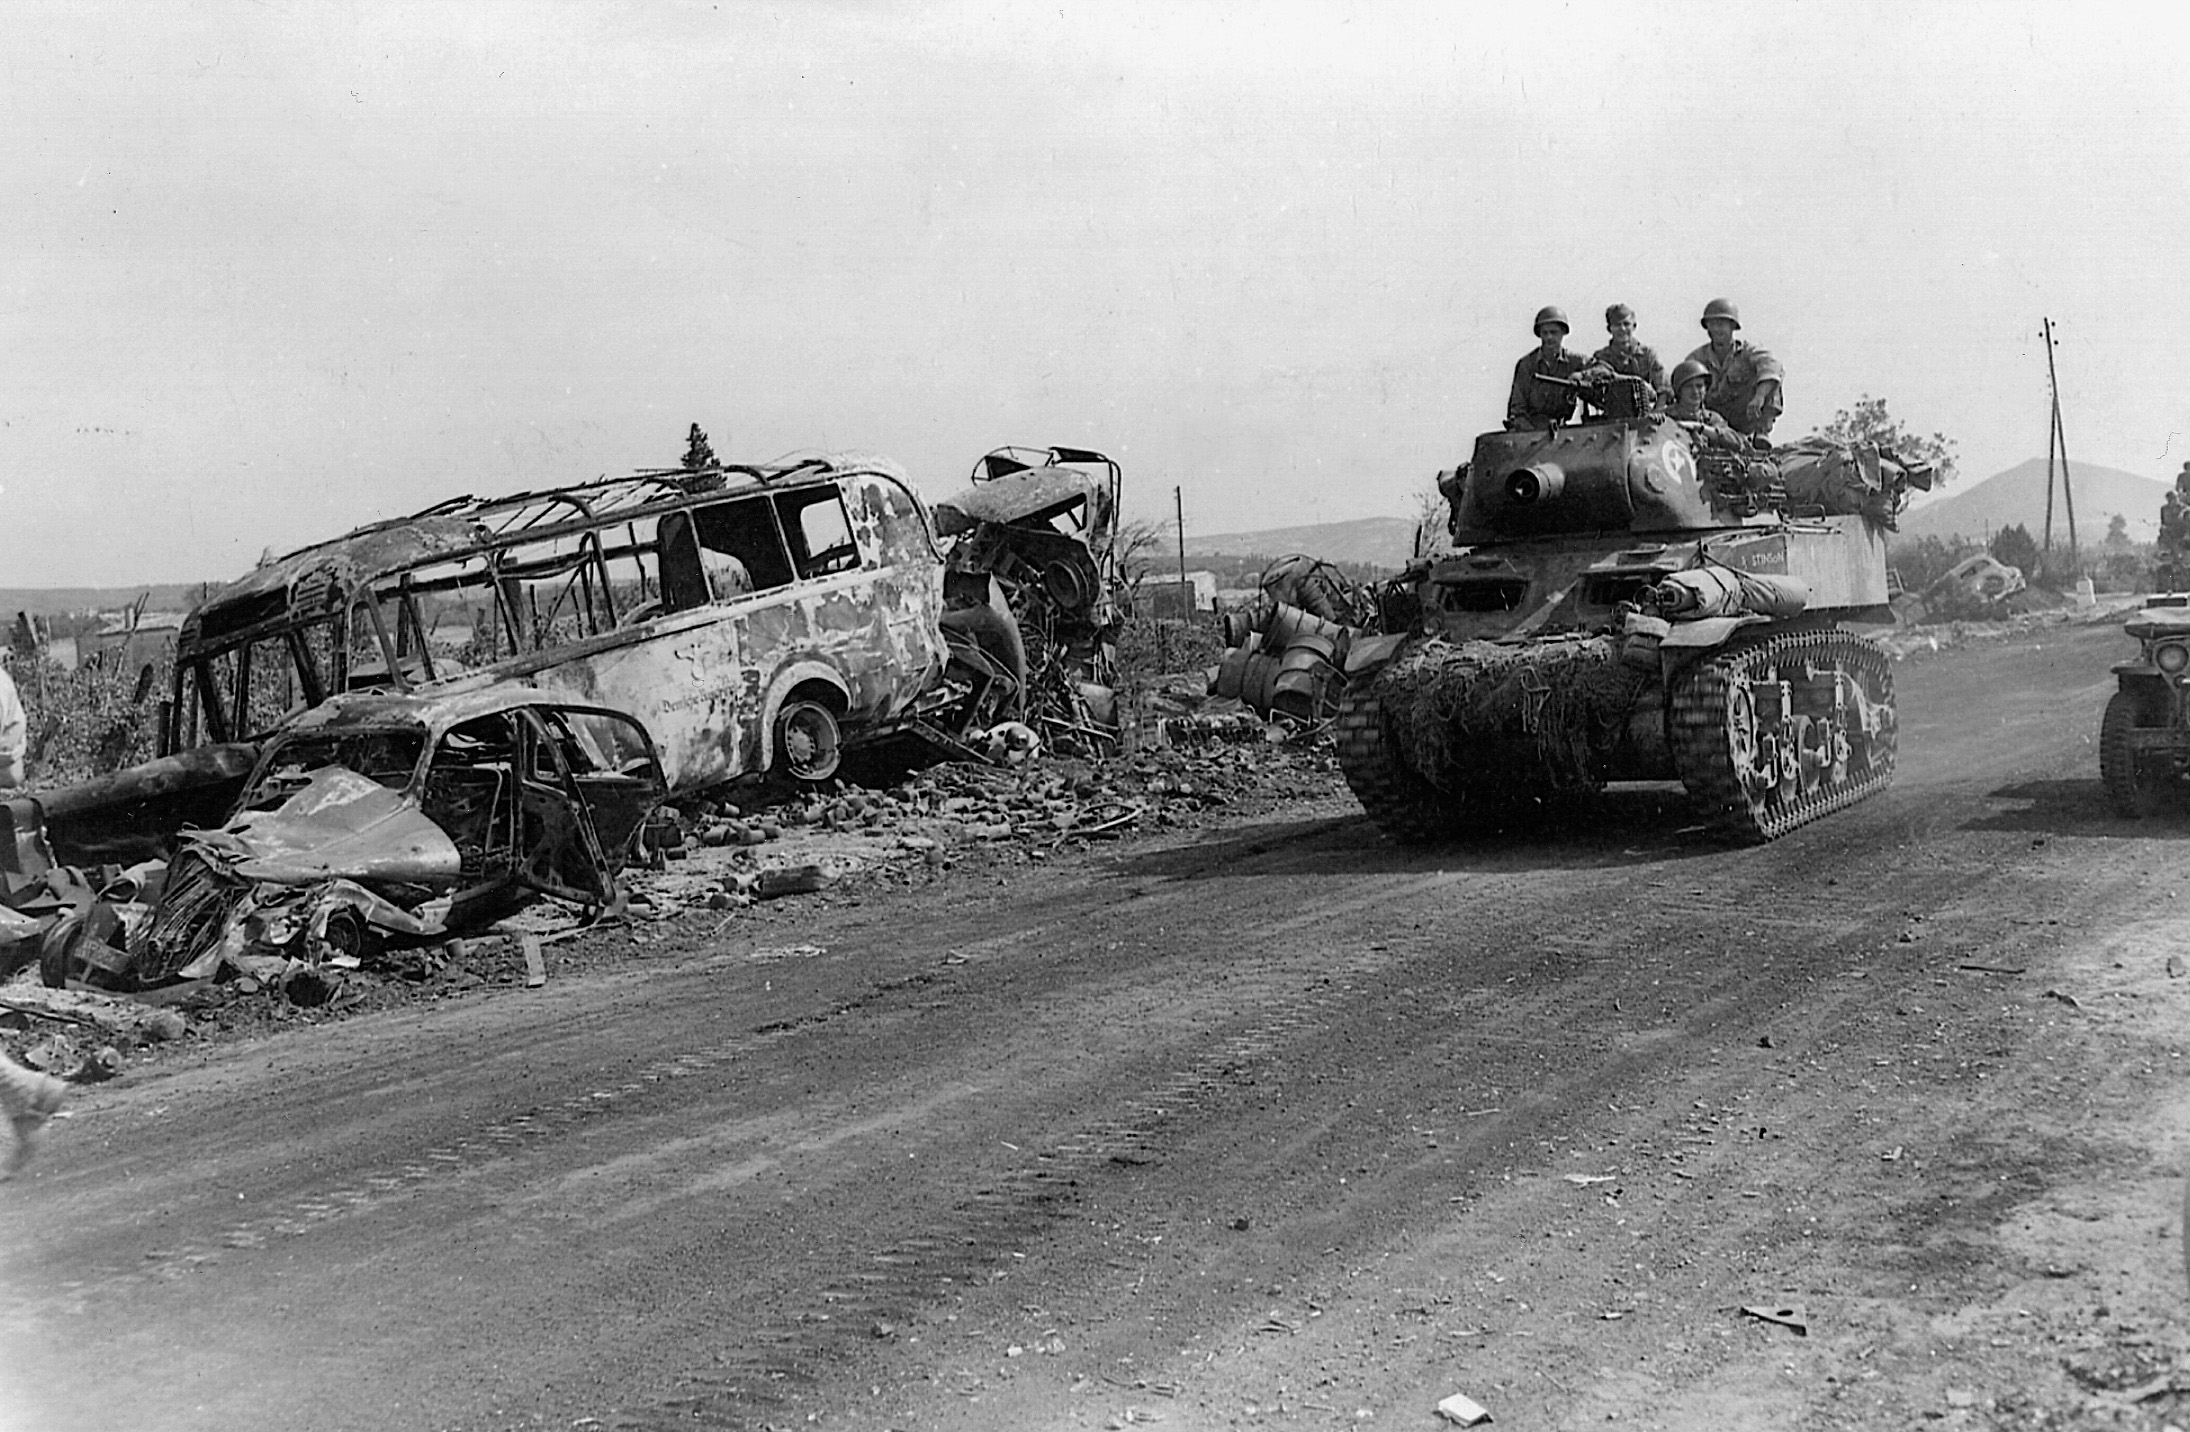 Passing the charred remnants of a bus, tanks of the U.S. 7th Army roll down a dusty road into the town of Montelimar.